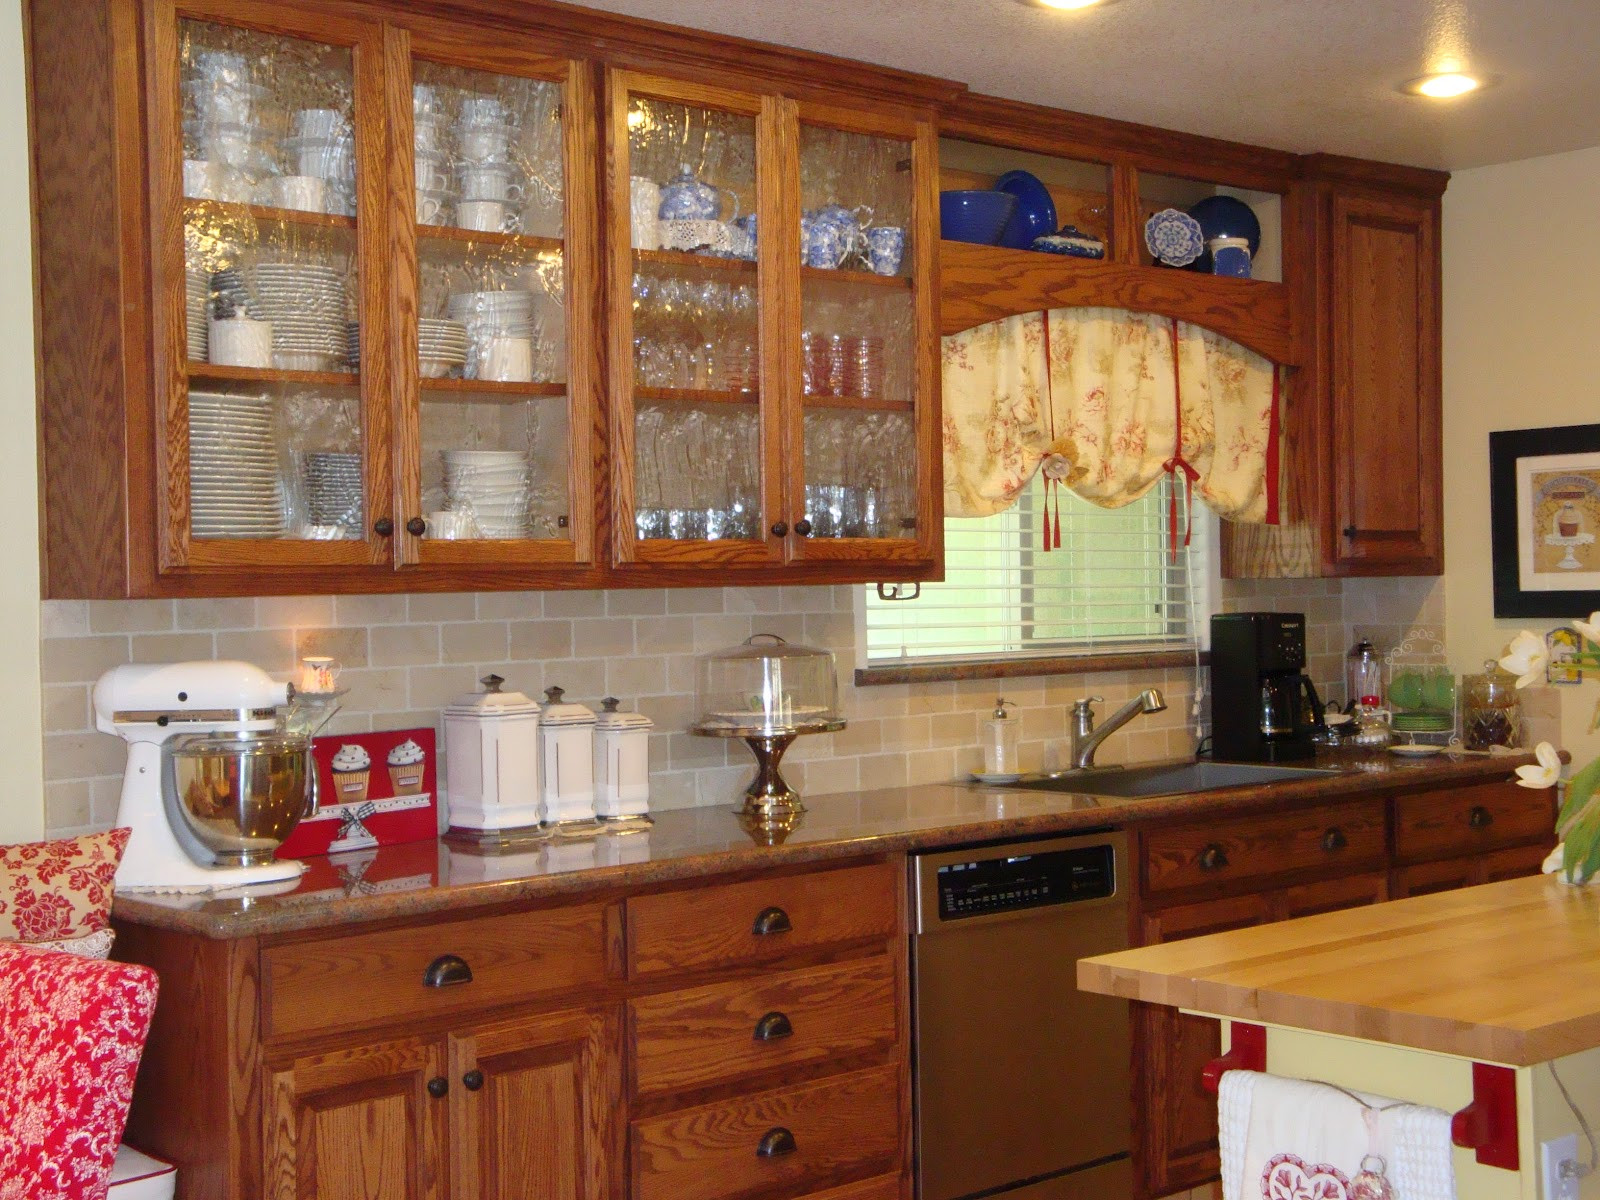 Kitchen Cabinets Glass Doors
 Home is Where the Heart is Seeded Glass in the Kitchen